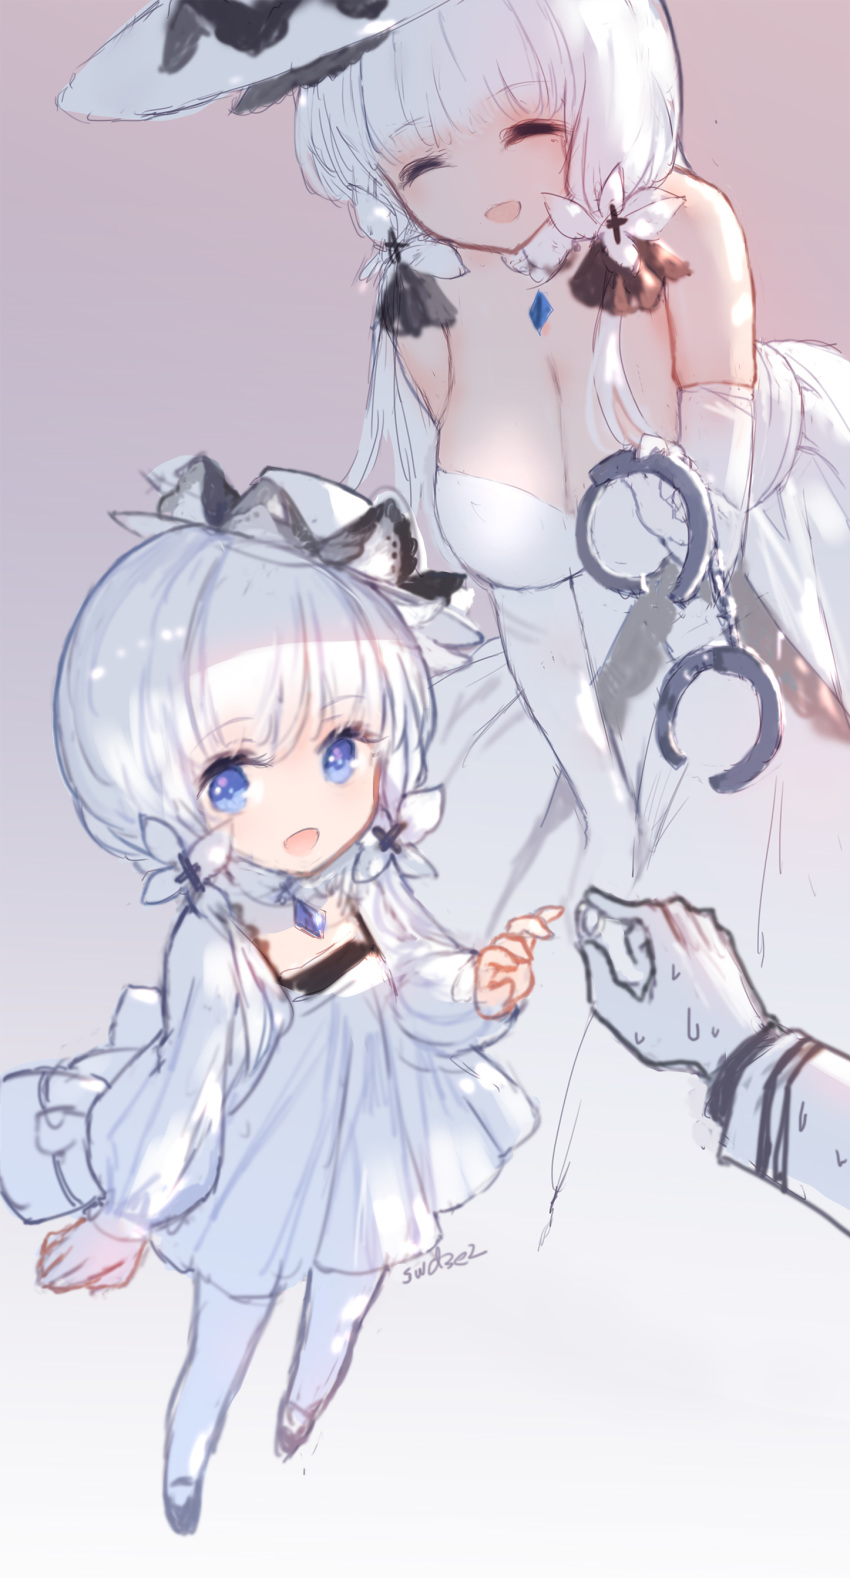 1boy 1girl 2girls absurdres age_difference arm_up artist_name azur_lane bare_shoulders blue_eyes bow breasts child child_marriage choker cleavage clenched_hand closed_eyes commander_(azur_lane) commentary cuffs dress elbow_gloves flower gloves hair_flower hair_ornament handcuffs hands hat highres holding holding_handcuffs holding_ring illustrious_(azur_lane) jewelry large_breasts leaning_forward little_illustrious_(azur_lane) long_hair low_twintails multiple_girls open_eyes open_mouth pantyhose pendant pink_background ring silver_hair simple_background smile strapless strapless_dress swd3e2 sweatdrop twintails wedding_band white_dress white_gloves white_hair white_headwear white_legwear younger